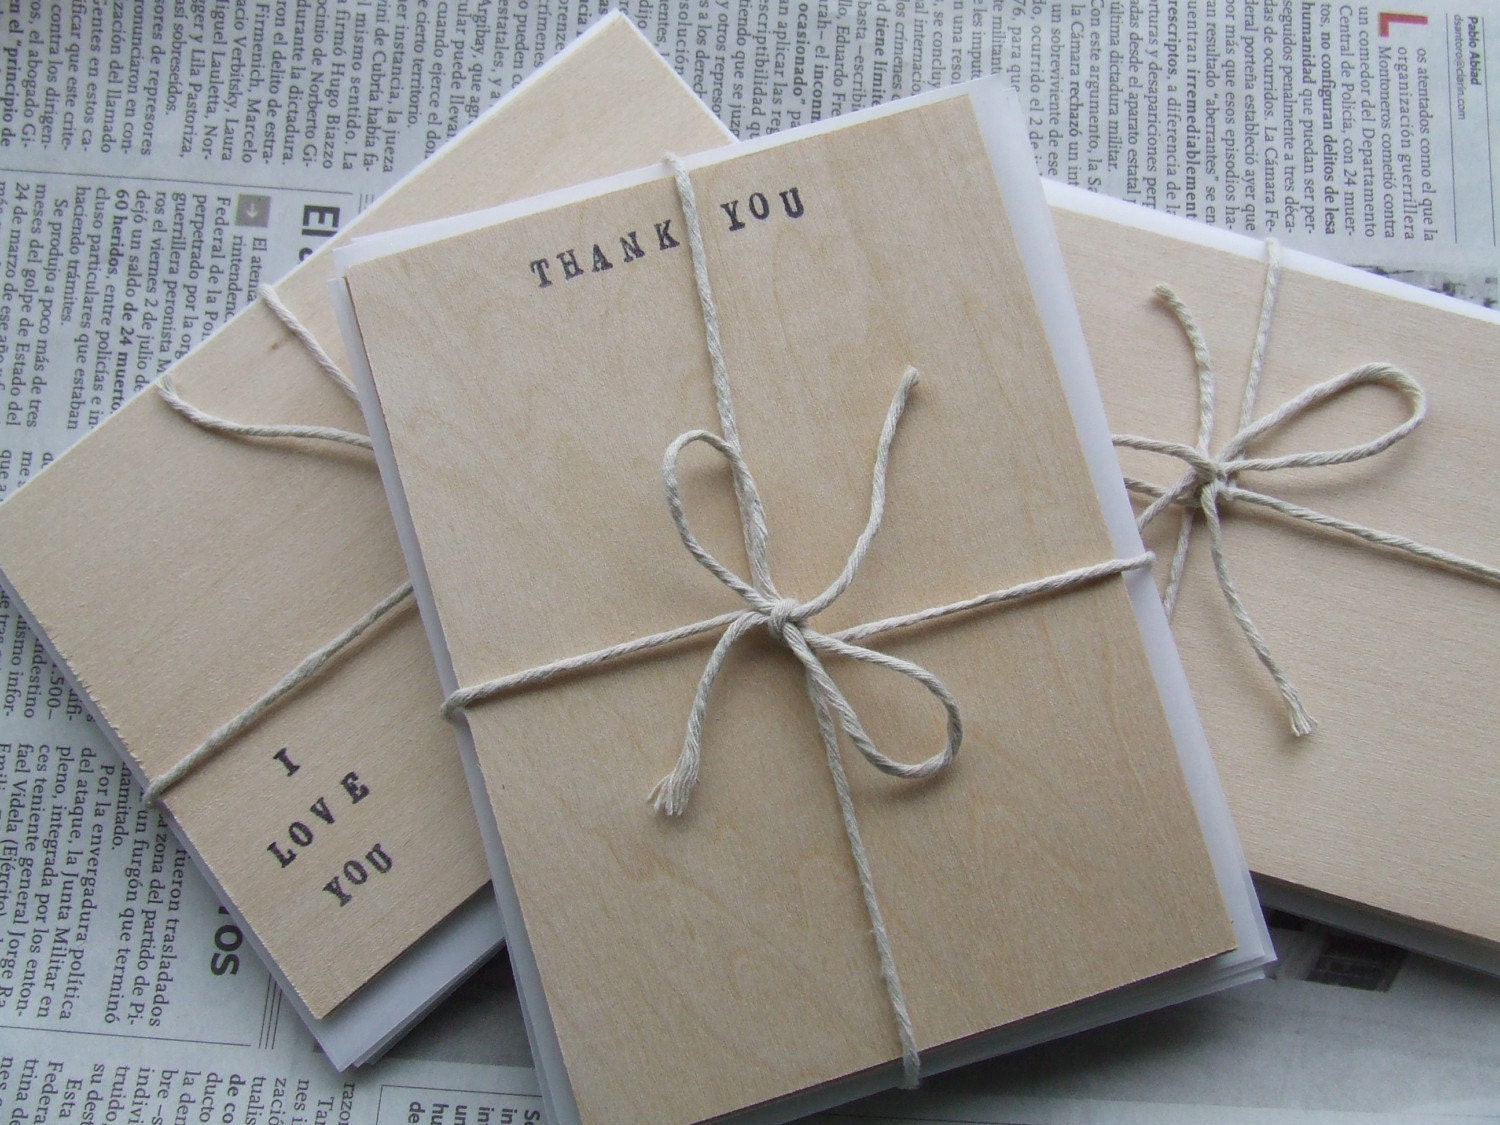 THANK YOU wood stationery set of five note cards and envelopes by Paloma's Nest